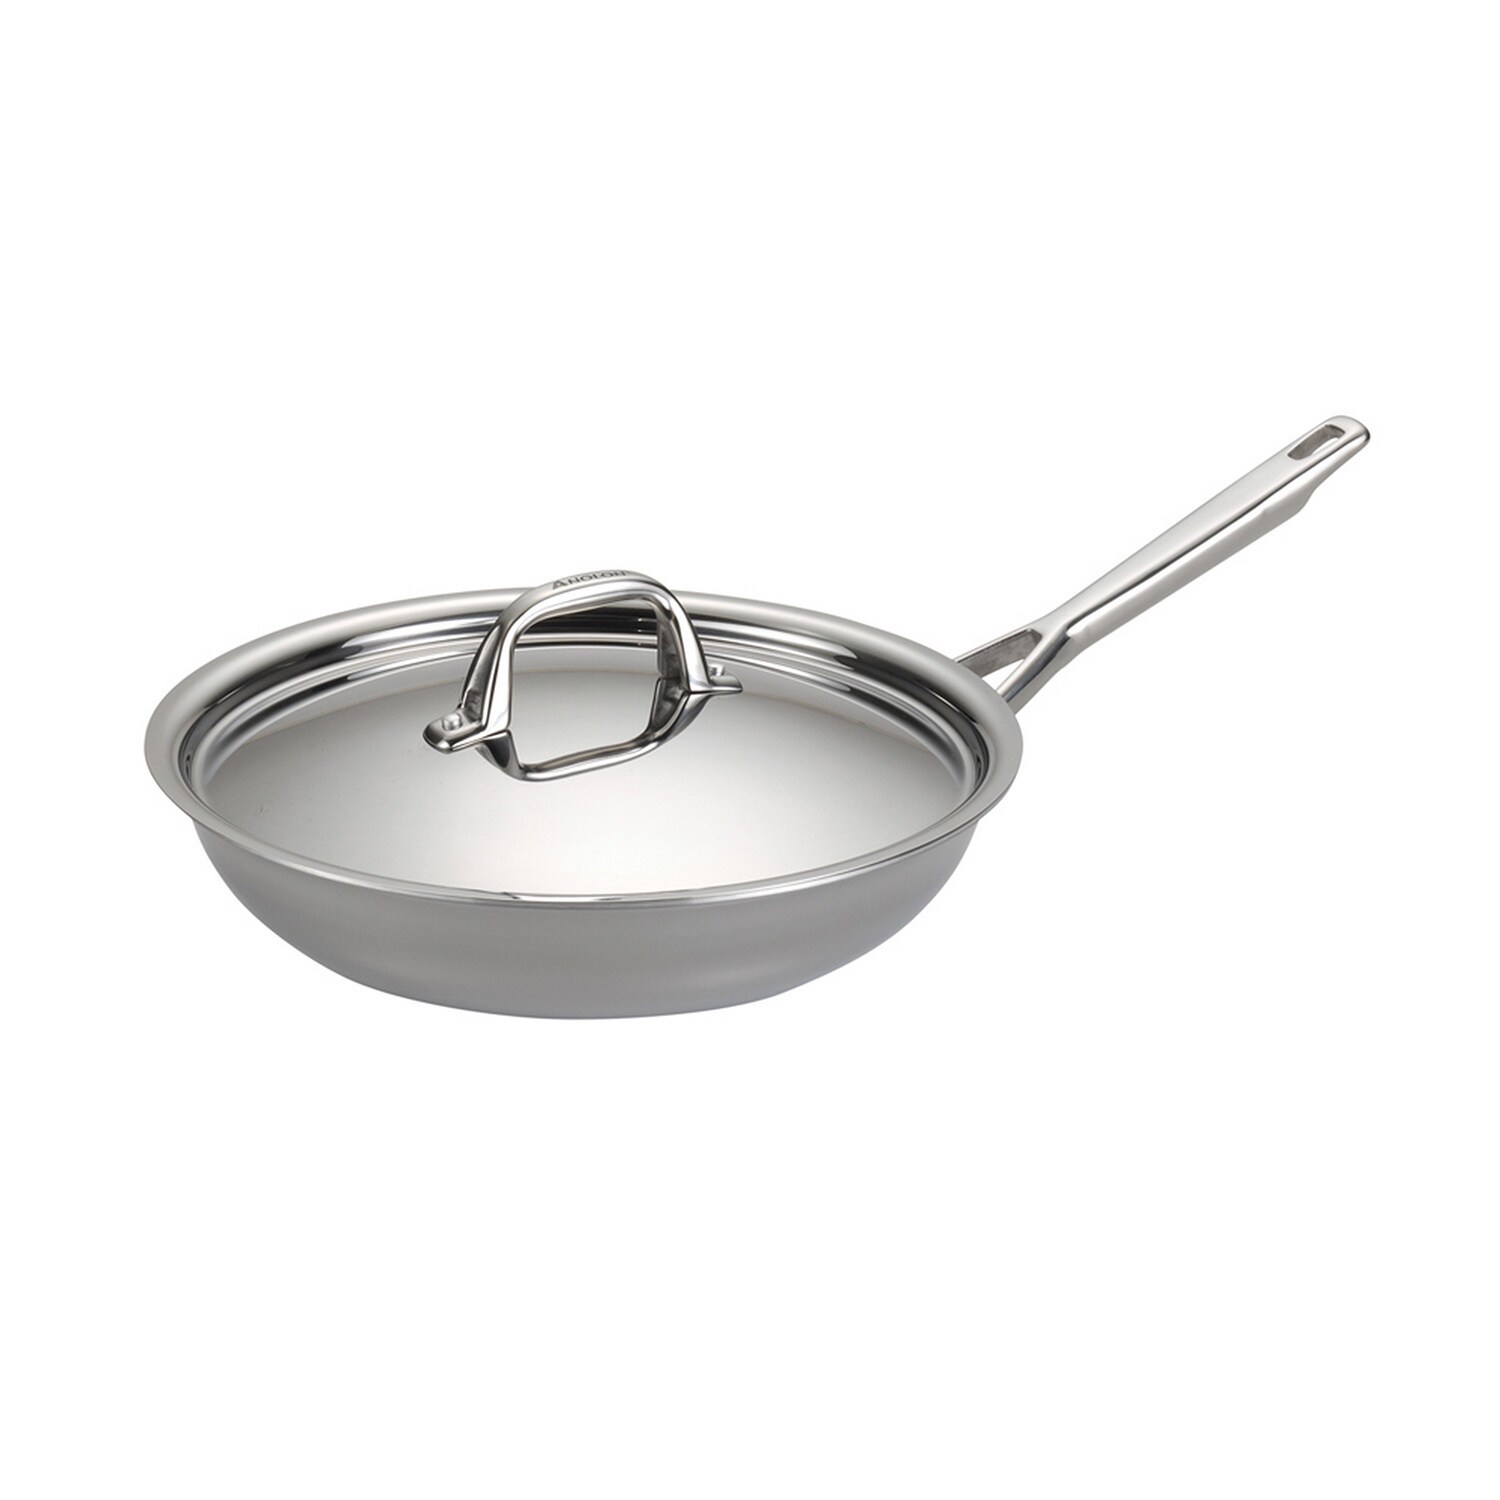 https://ak1.ostkcdn.com/images/products/9206704/Anolon-Tri-ply-Clad-Stainless-Steel-12-3-4-inch-Covered-Skillet-05230e32-79f2-4031-be54-904c9fb98994.jpg